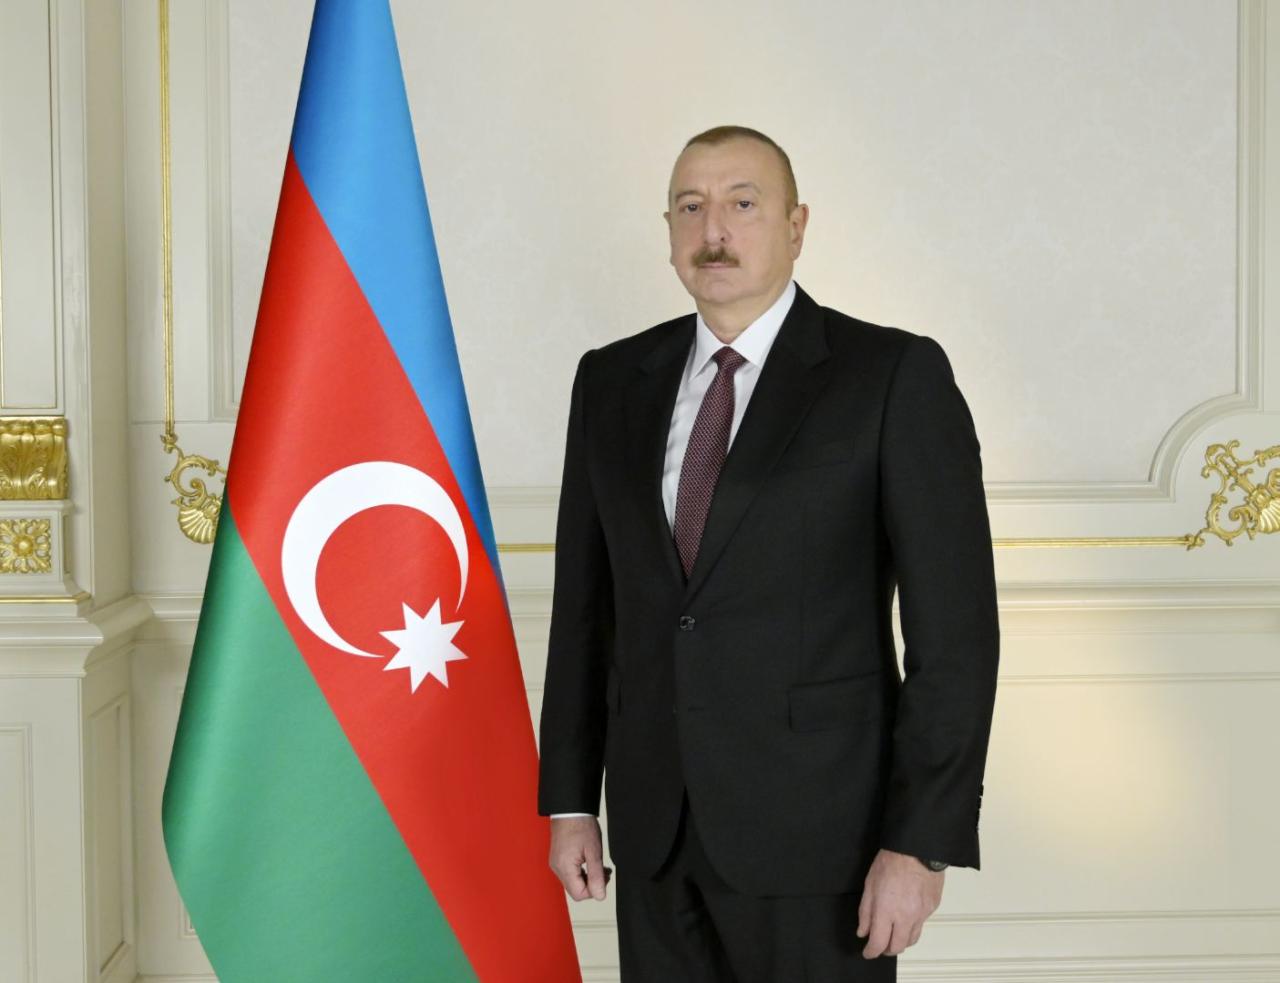 President Aliyev outlines significant services of world Azerbaijanis in Karabakh war victory [UPDATE]